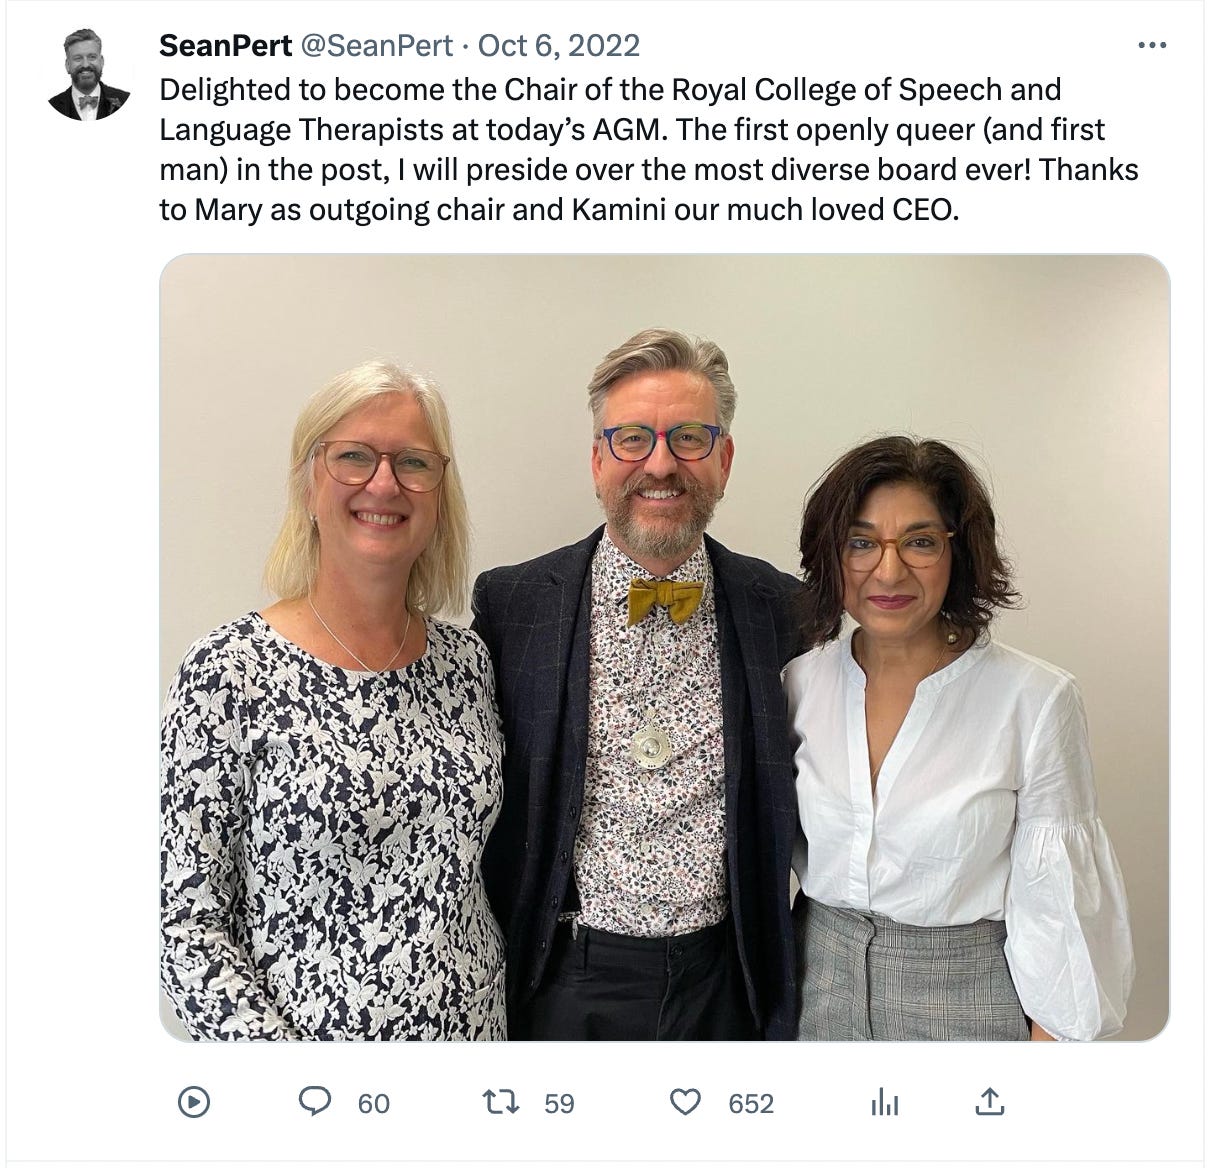 Tweet by Sean Pert of 6th October 2022 stating: Delighted to become the Chair of the Royal College of Speech and Language Therapists at today’s AGM. The first openly queer (and first man) in the post, I will preside over the most diverse board ever! Thanks to Mary as outgoing chair and Kamini our much loved CEO